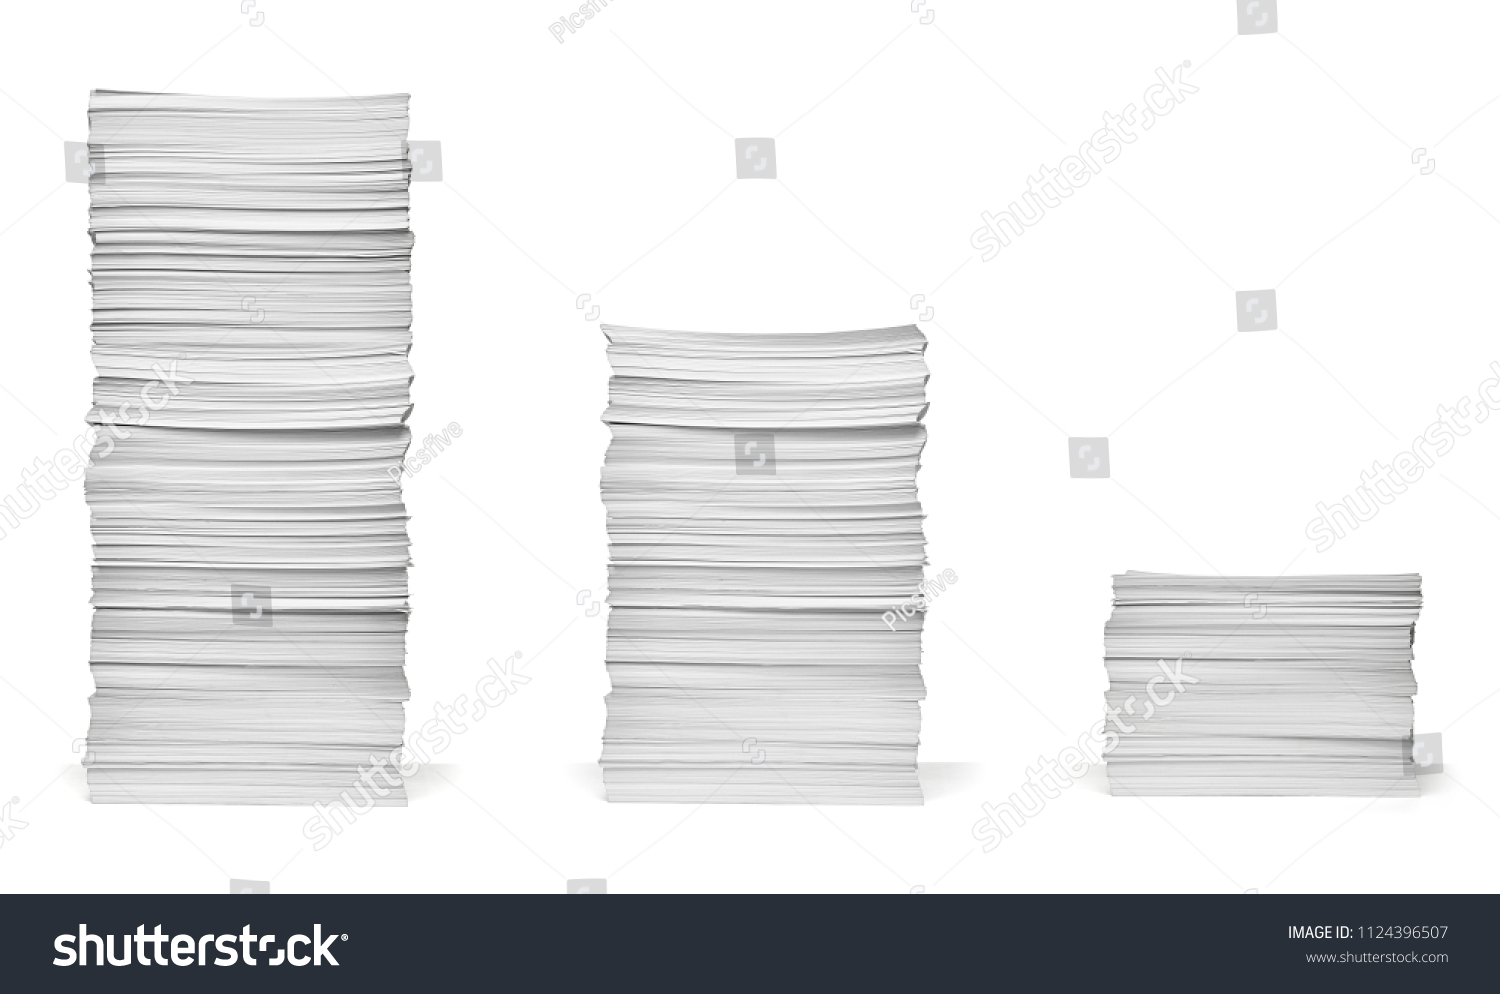 collection of various  stack of papers on white background. each one is shot separately #1124396507